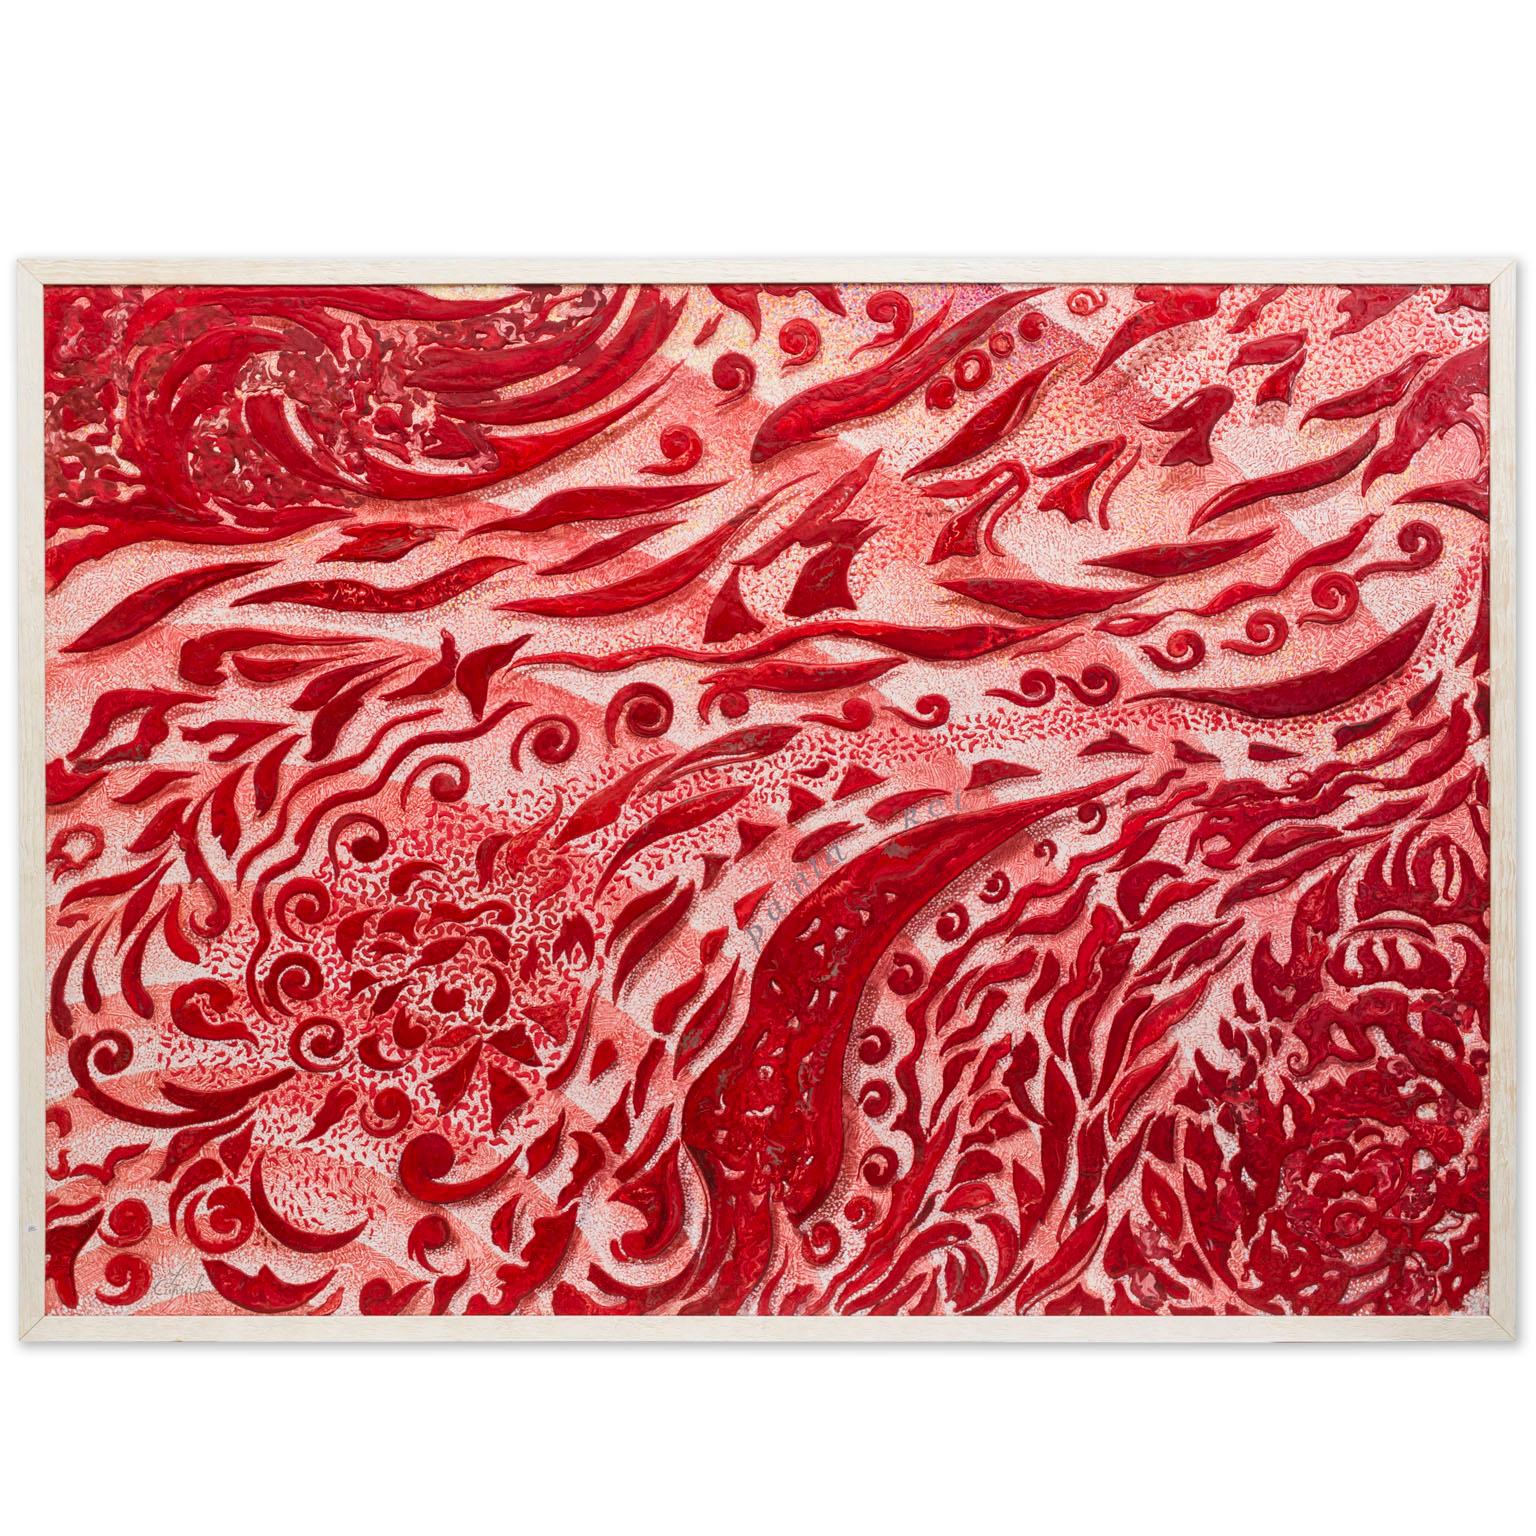 Artwork handmade wall panel red relief decor made in Italy by Cupioli available